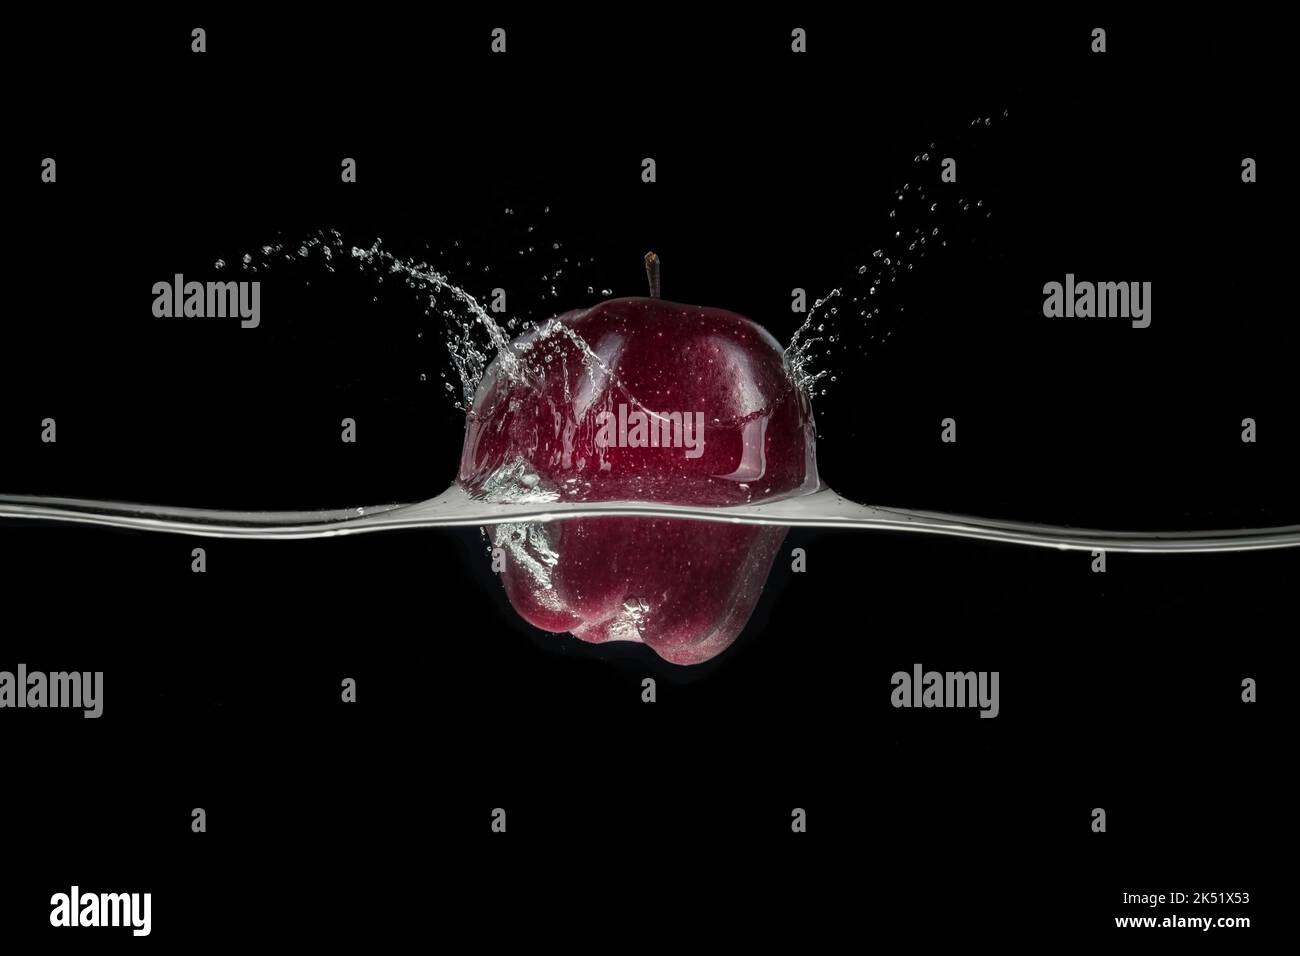 Red apple splashing in water, viewed from a side on black background. Stock Photo